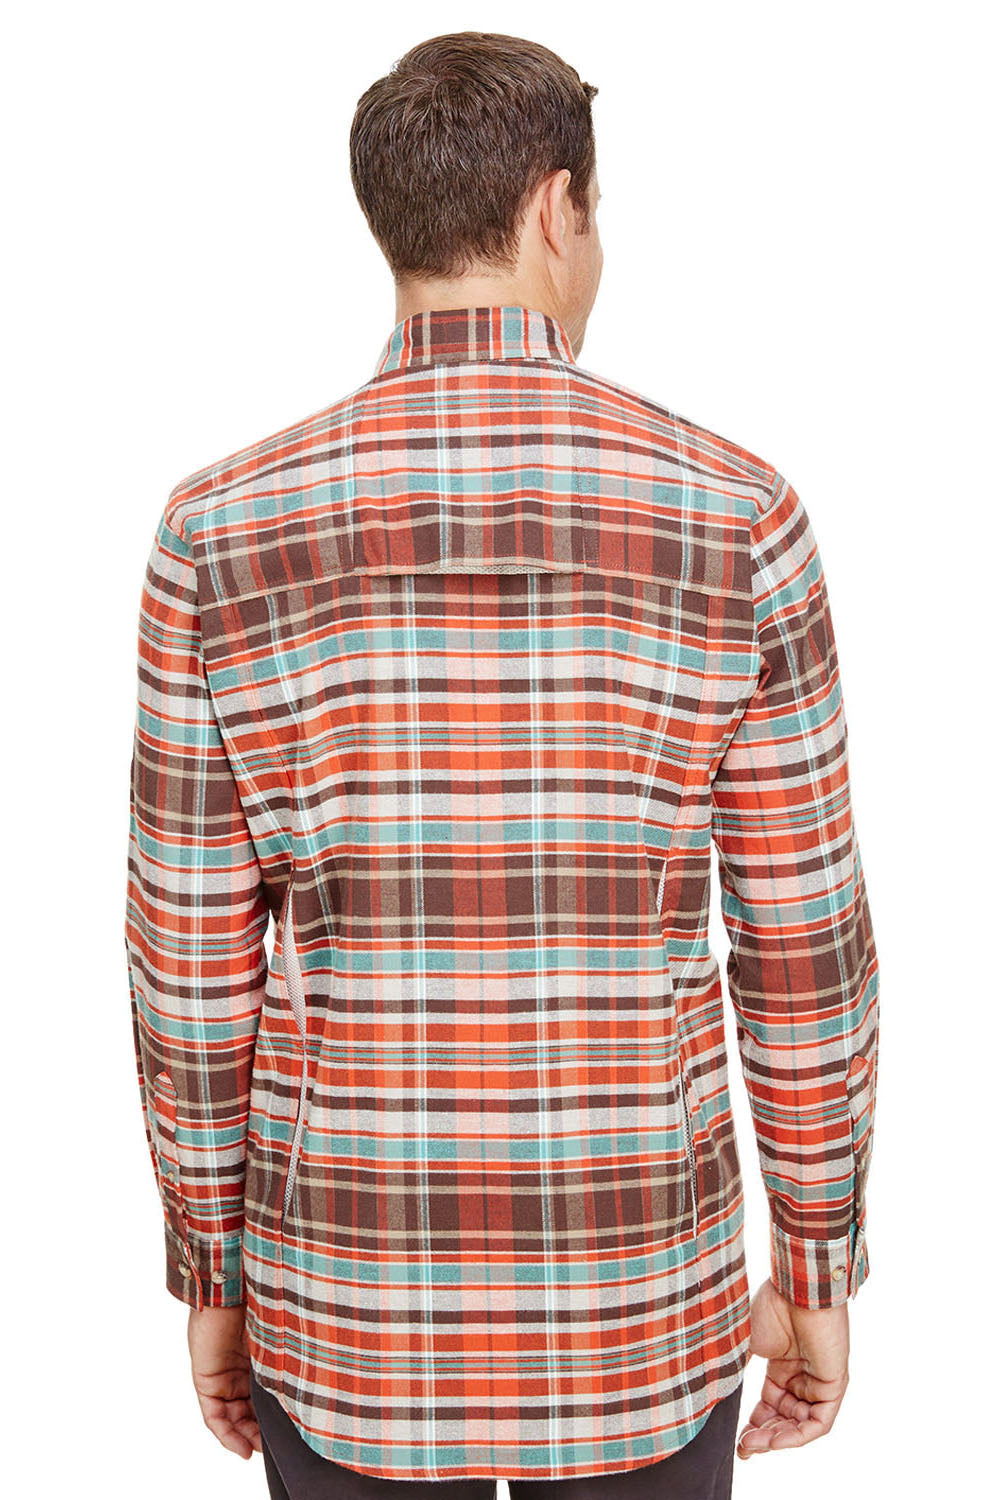 Backpacker BP7091 Mens Stretch Flannel Long Sleeve Button Down Shirt w/ Double Pockets Rust Red Back